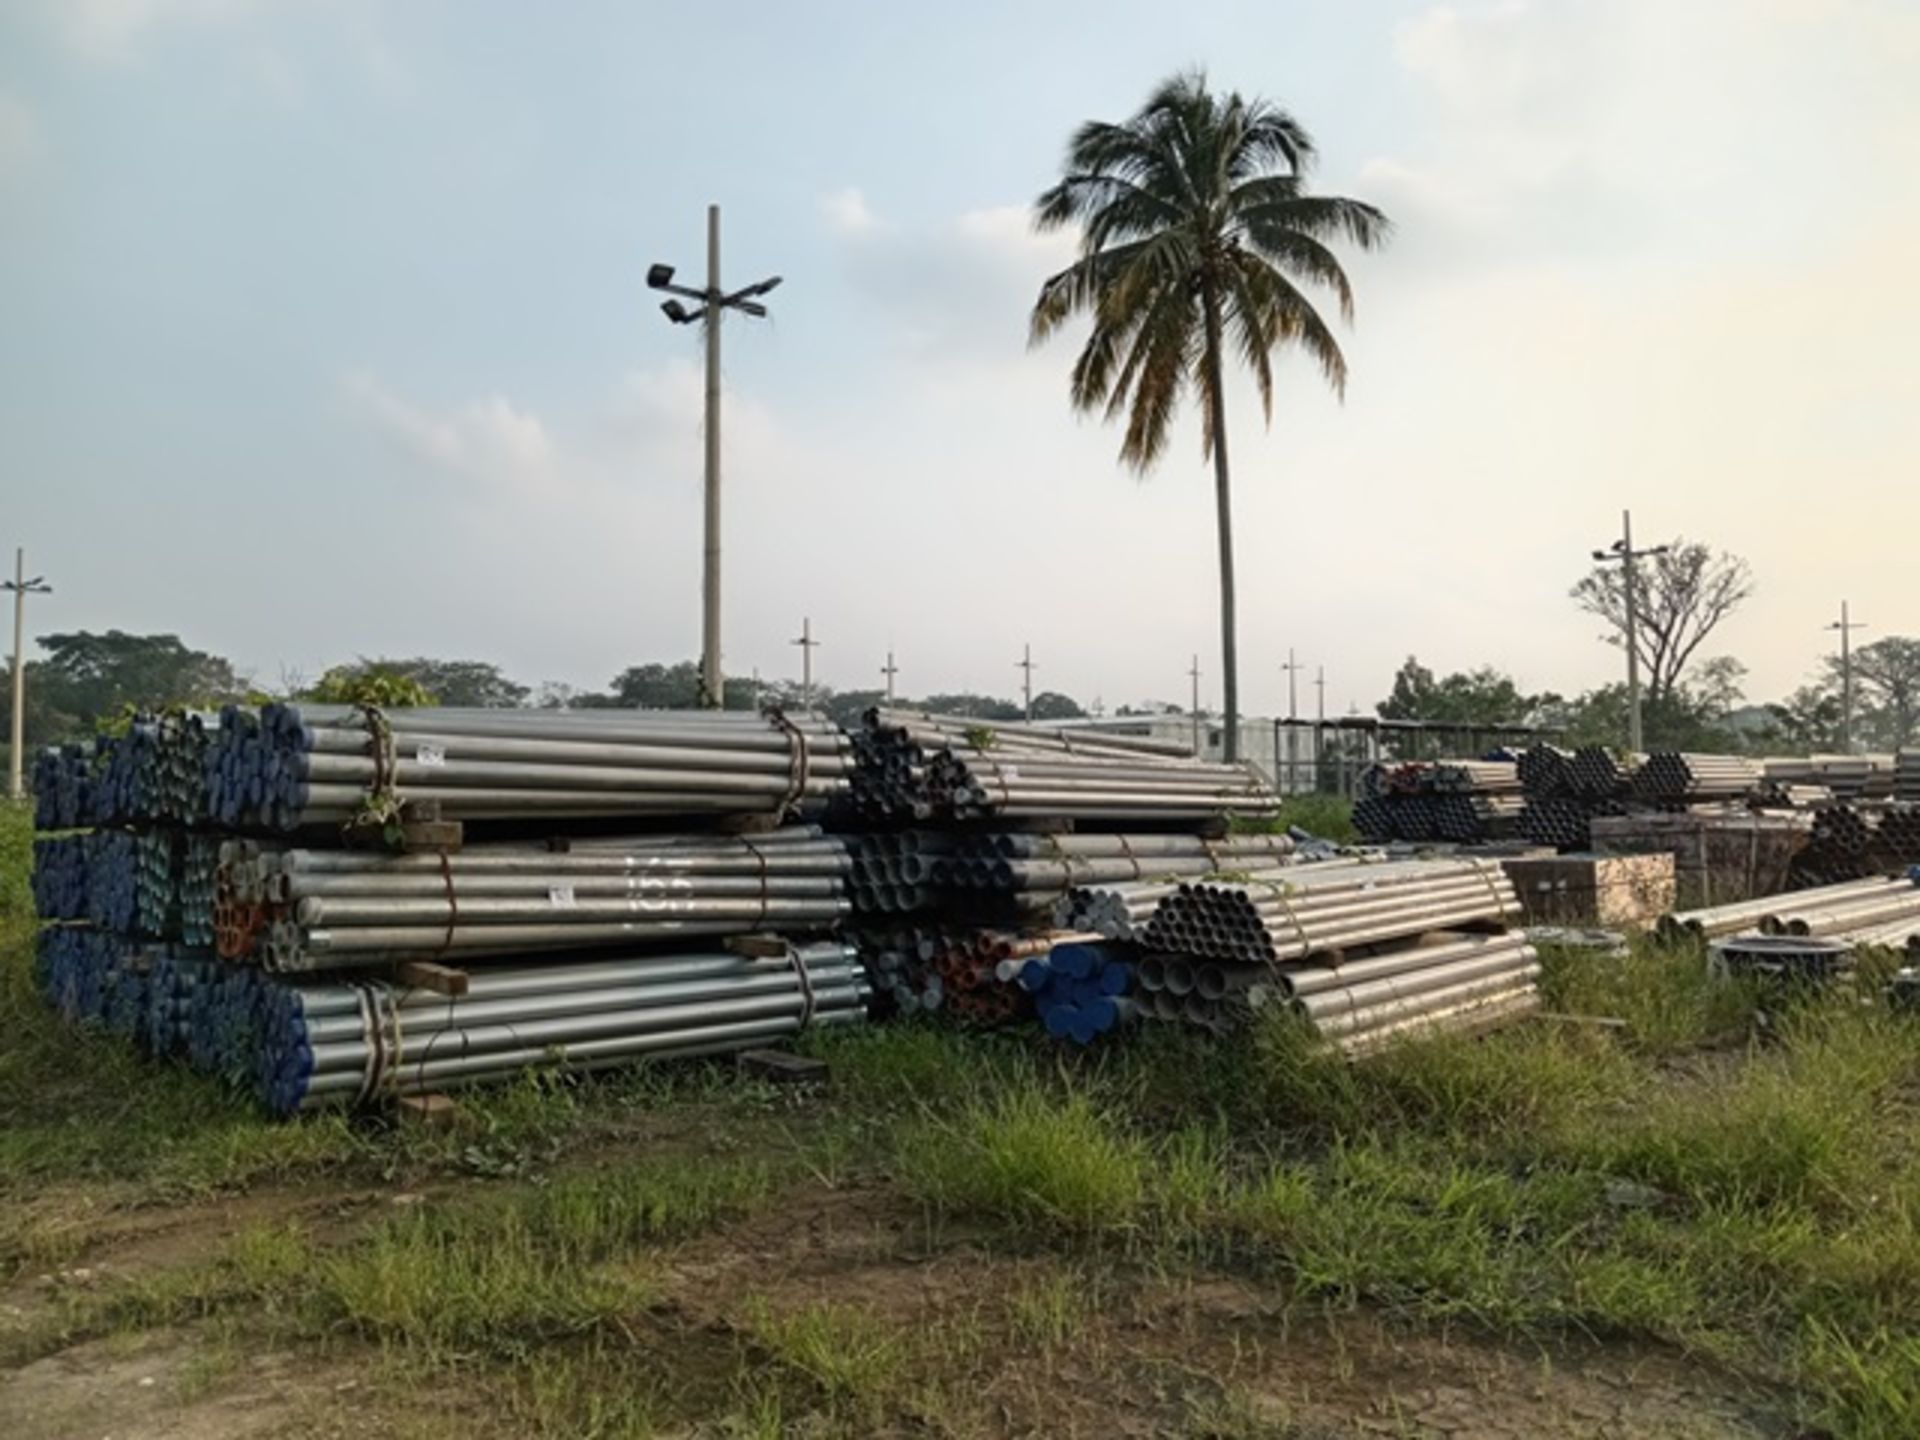 LOT OF 4375 METERS OF GALVANIZED CARBON STEEL PIPE WITH THREADED ENDS - Image 6 of 10